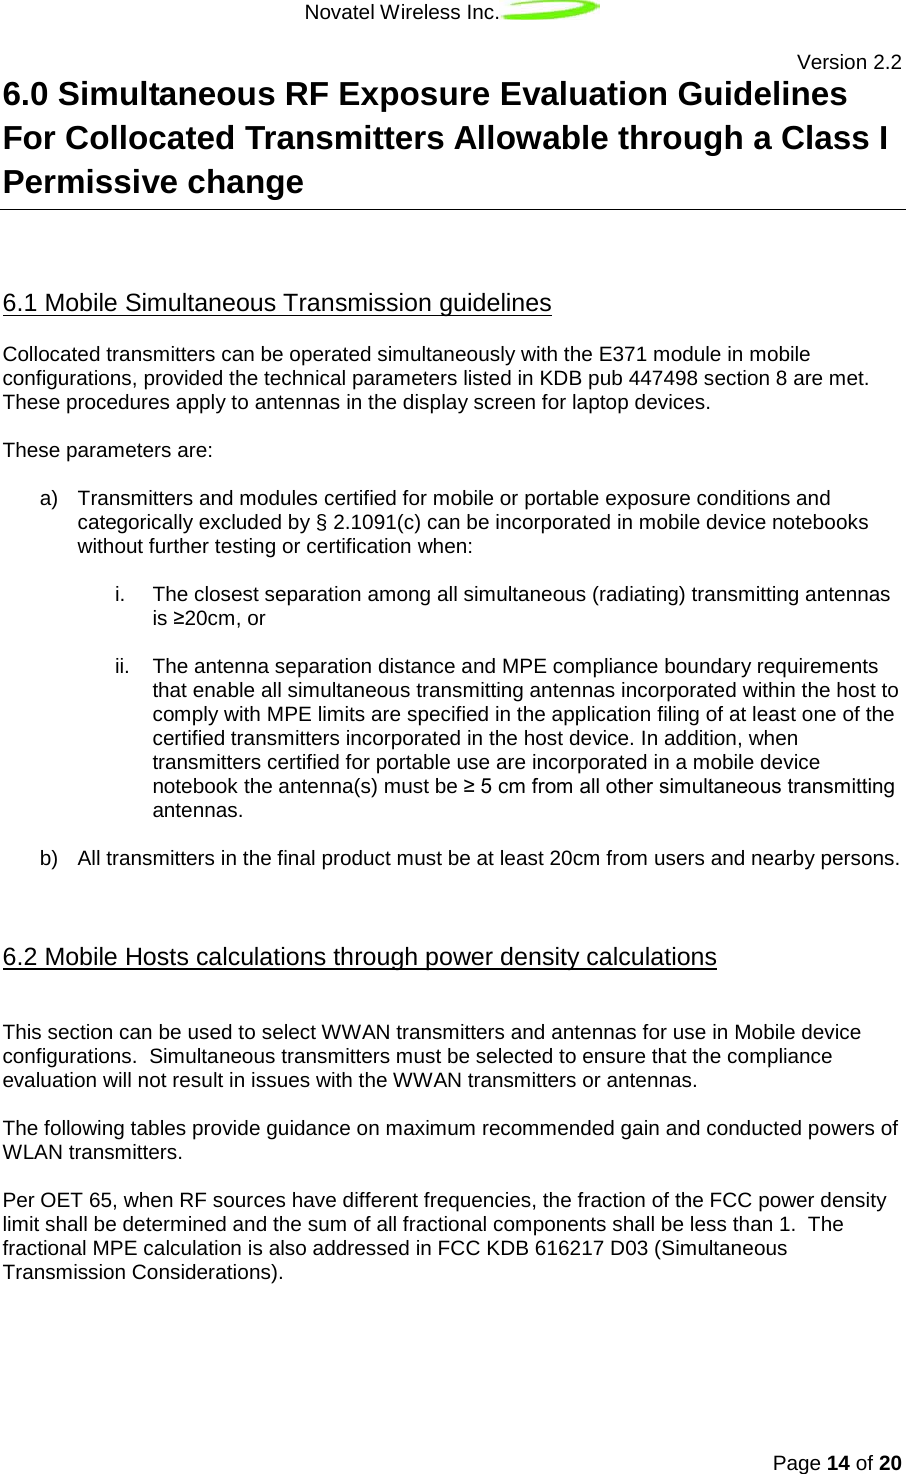 Novatel Wireless Inc.   Version 2.2 Page 14 of 20  6.0 Simultaneous RF Exposure Evaluation Guidelines For Collocated Transmitters Allowable through a Class I Permissive change  Collocated transmitters can be operated simultaneously with the E371 module in mobile configurations, provided the technical parameters listed in KDB pub 447498 section 8 are met. These procedures apply to antennas in the display screen for laptop devices. 6.1 Mobile Simultaneous Transmission guidelines  These parameters are:  a) Transmitters and modules certified for mobile or portable exposure conditions and categorically excluded by § 2.1091(c) can be incorporated in mobile device notebooks without further testing or certification when:   i. The closest separation among all simultaneous (radiating) transmitting antennas is ≥20cm, or  ii. The antenna separation distance and MPE compliance boundary requirements that enable all simultaneous transmitting antennas incorporated within the host to comply with MPE limits are specified in the application filing of at least one of the certified transmitters incorporated in the host device. In addition, when transmitters certified for portable use are incorporated in a mobile device notebook the antenna(s) must be ≥ 5 cm from all other simultaneous transmitting antennas.  b) All transmitters in the final product must be at least 20cm from users and nearby persons.    6.2 Mobile Hosts calculations through power density calculations This section can be used to select WWAN transmitters and antennas for use in Mobile device configurations.  Simultaneous transmitters must be selected to ensure that the compliance evaluation will not result in issues with the WWAN transmitters or antennas.  The following tables provide guidance on maximum recommended gain and conducted powers of WLAN transmitters.   Per OET 65, when RF sources have different frequencies, the fraction of the FCC power density limit shall be determined and the sum of all fractional components shall be less than 1.  The fractional MPE calculation is also addressed in FCC KDB 616217 D03 (Simultaneous Transmission Considerations).    